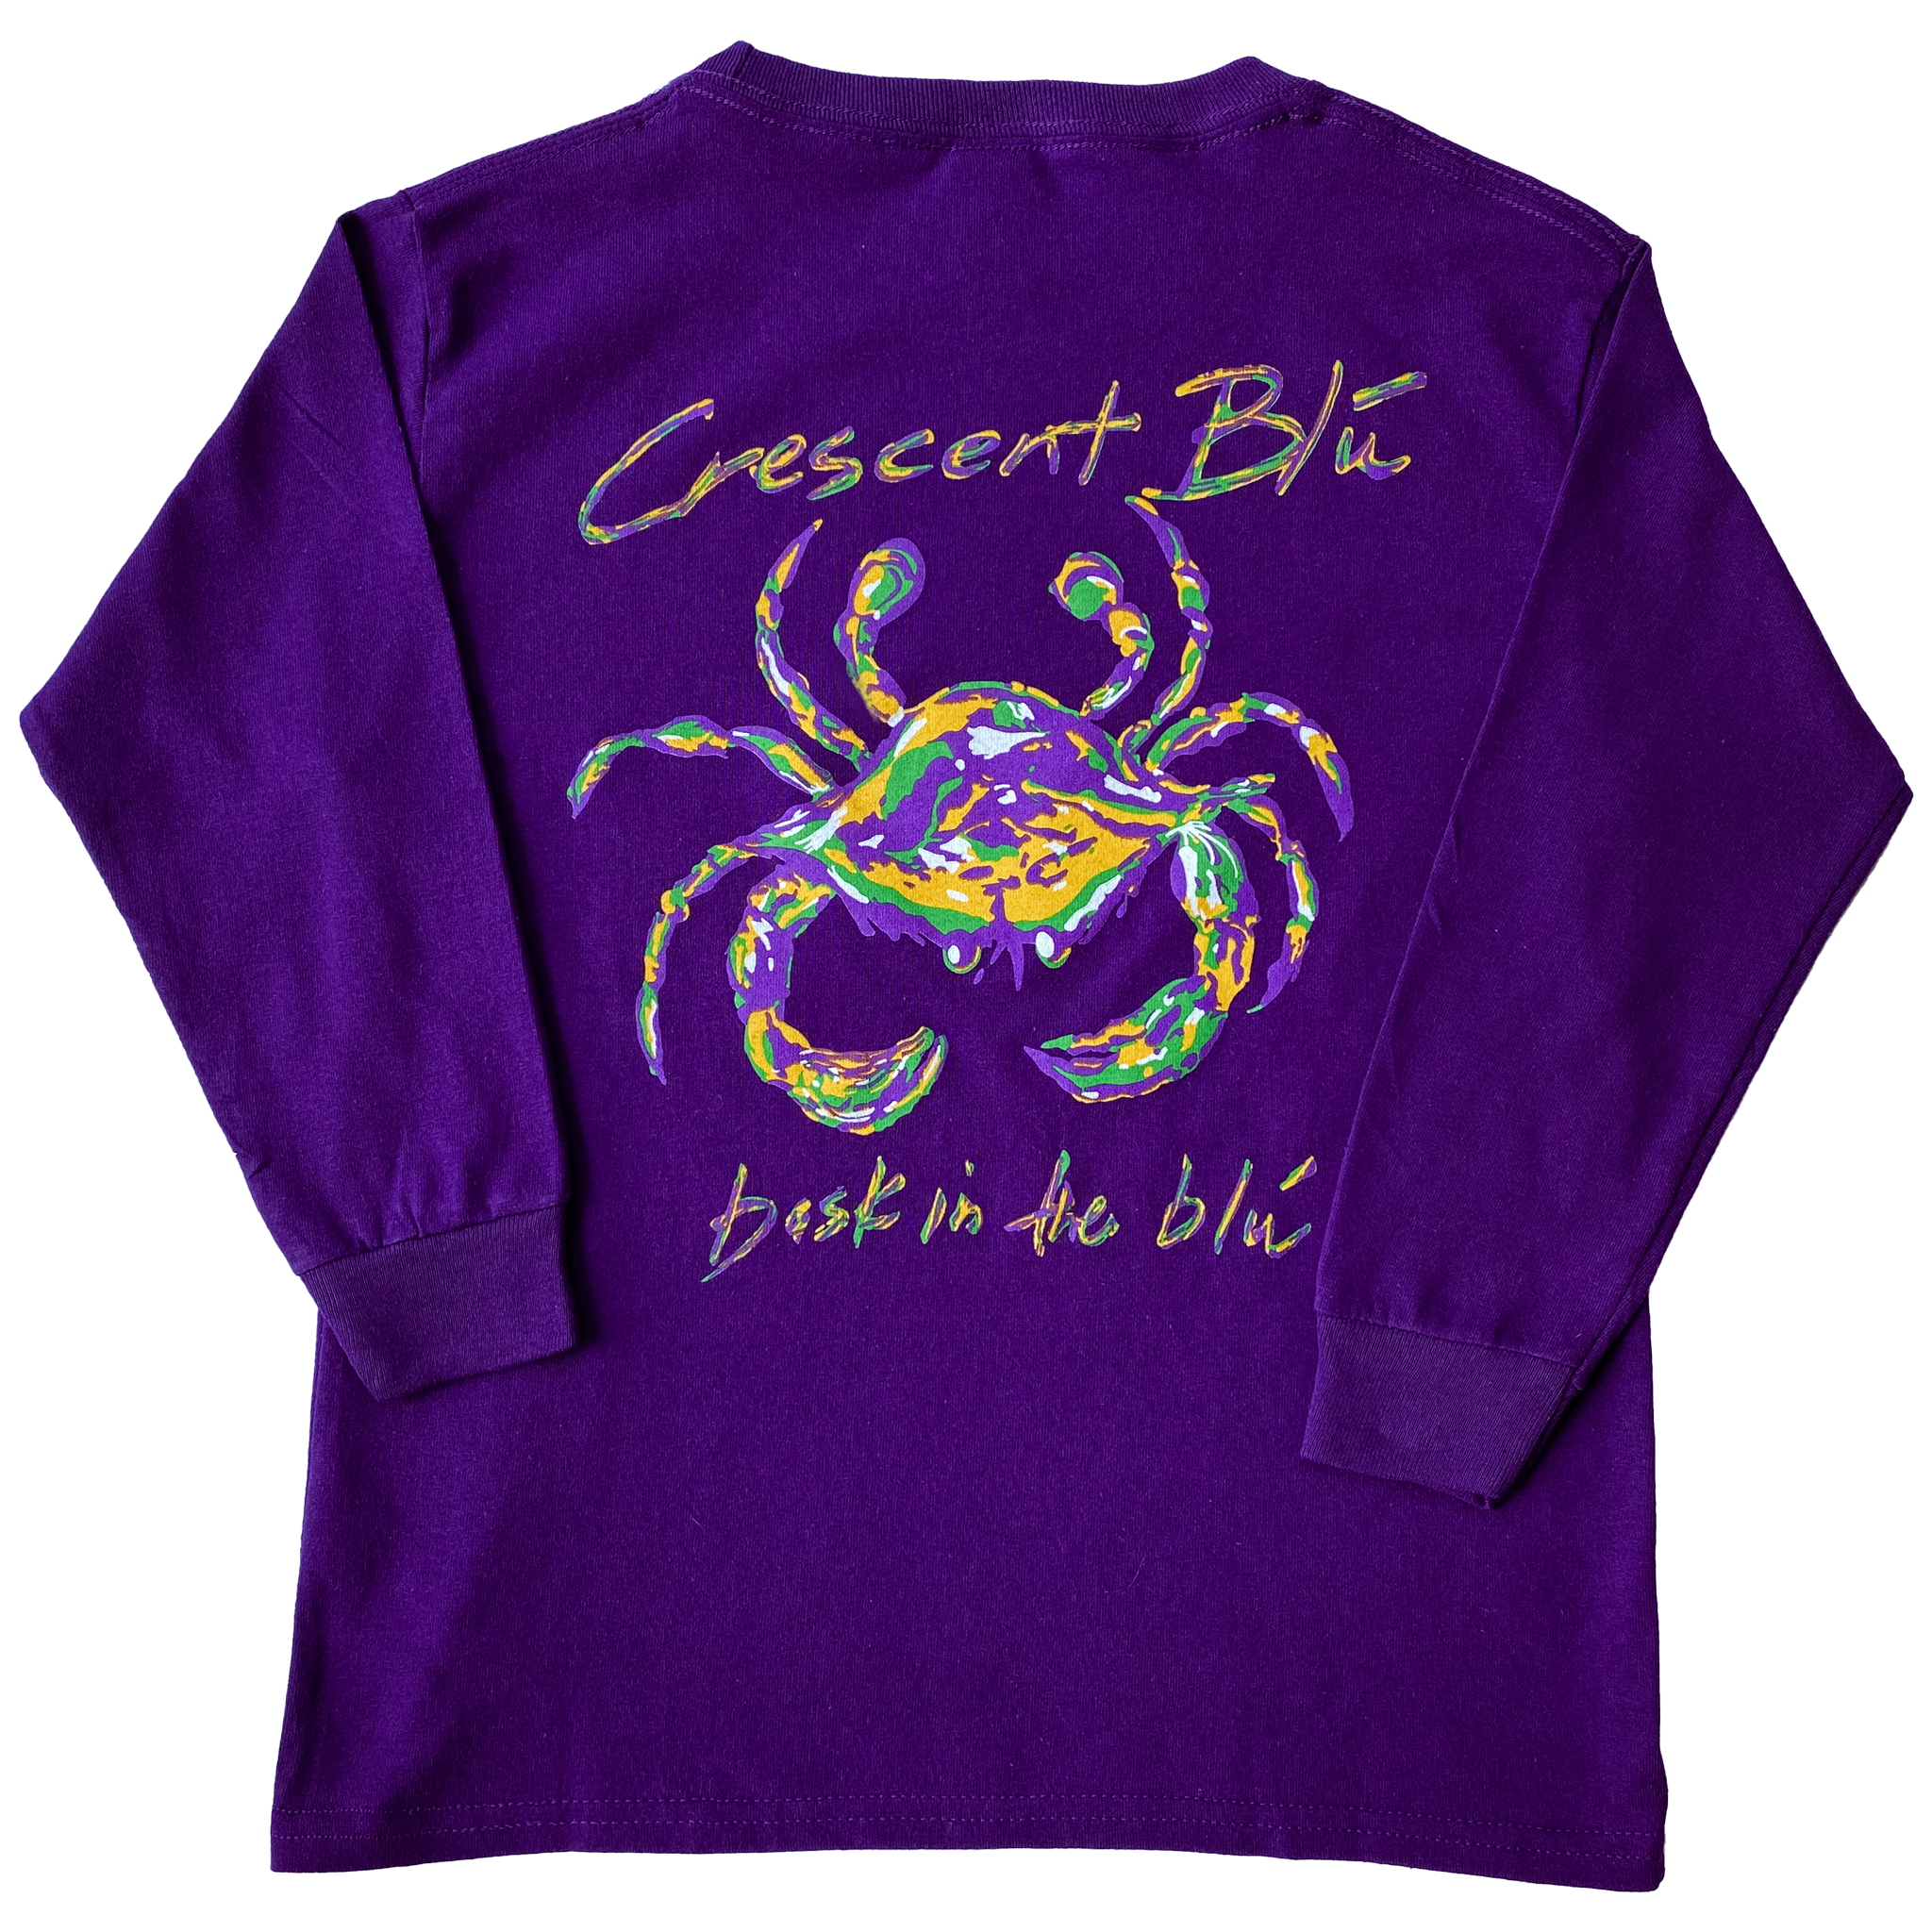 A long sleeve royal purple Mardi Gras t-shirt with a crab on the back.